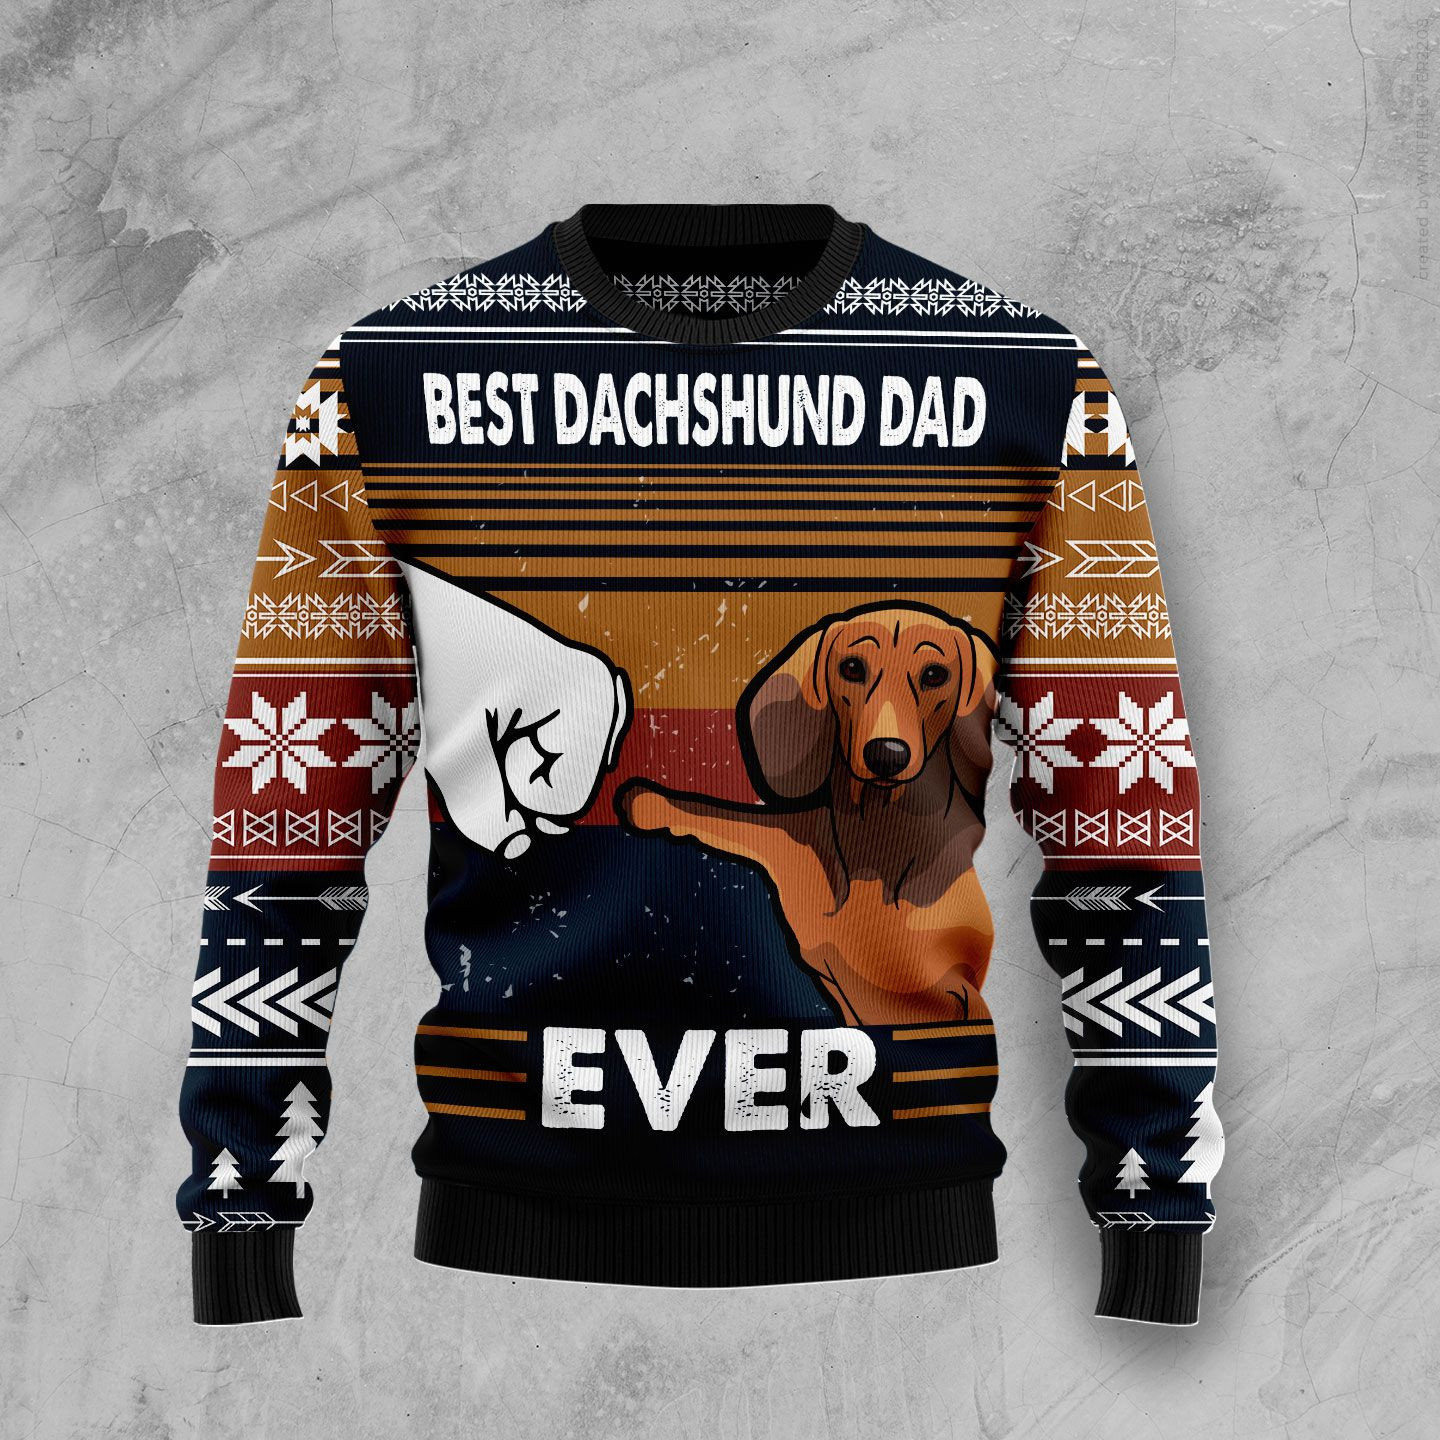 Best Dachshund Dad Ever Ugly Christmas Sweater, Ugly Sweater For Men Women, Holiday Sweater